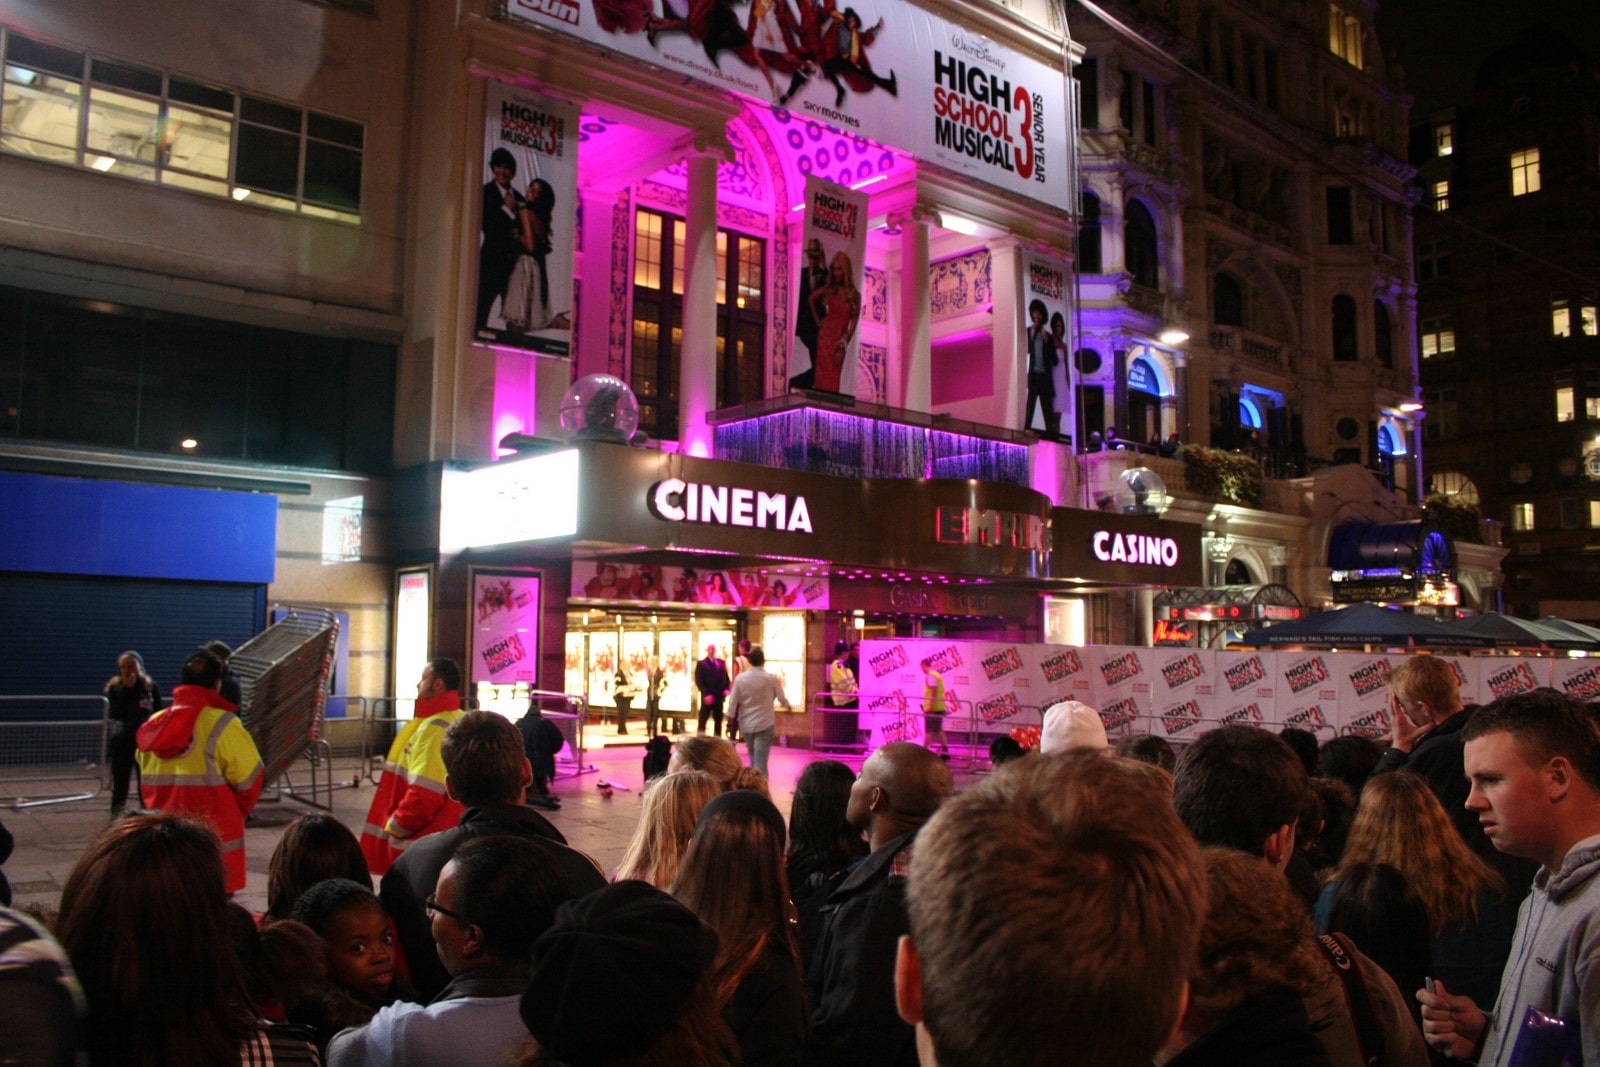 High School Musical 3 Premiere, Leicester Square, London